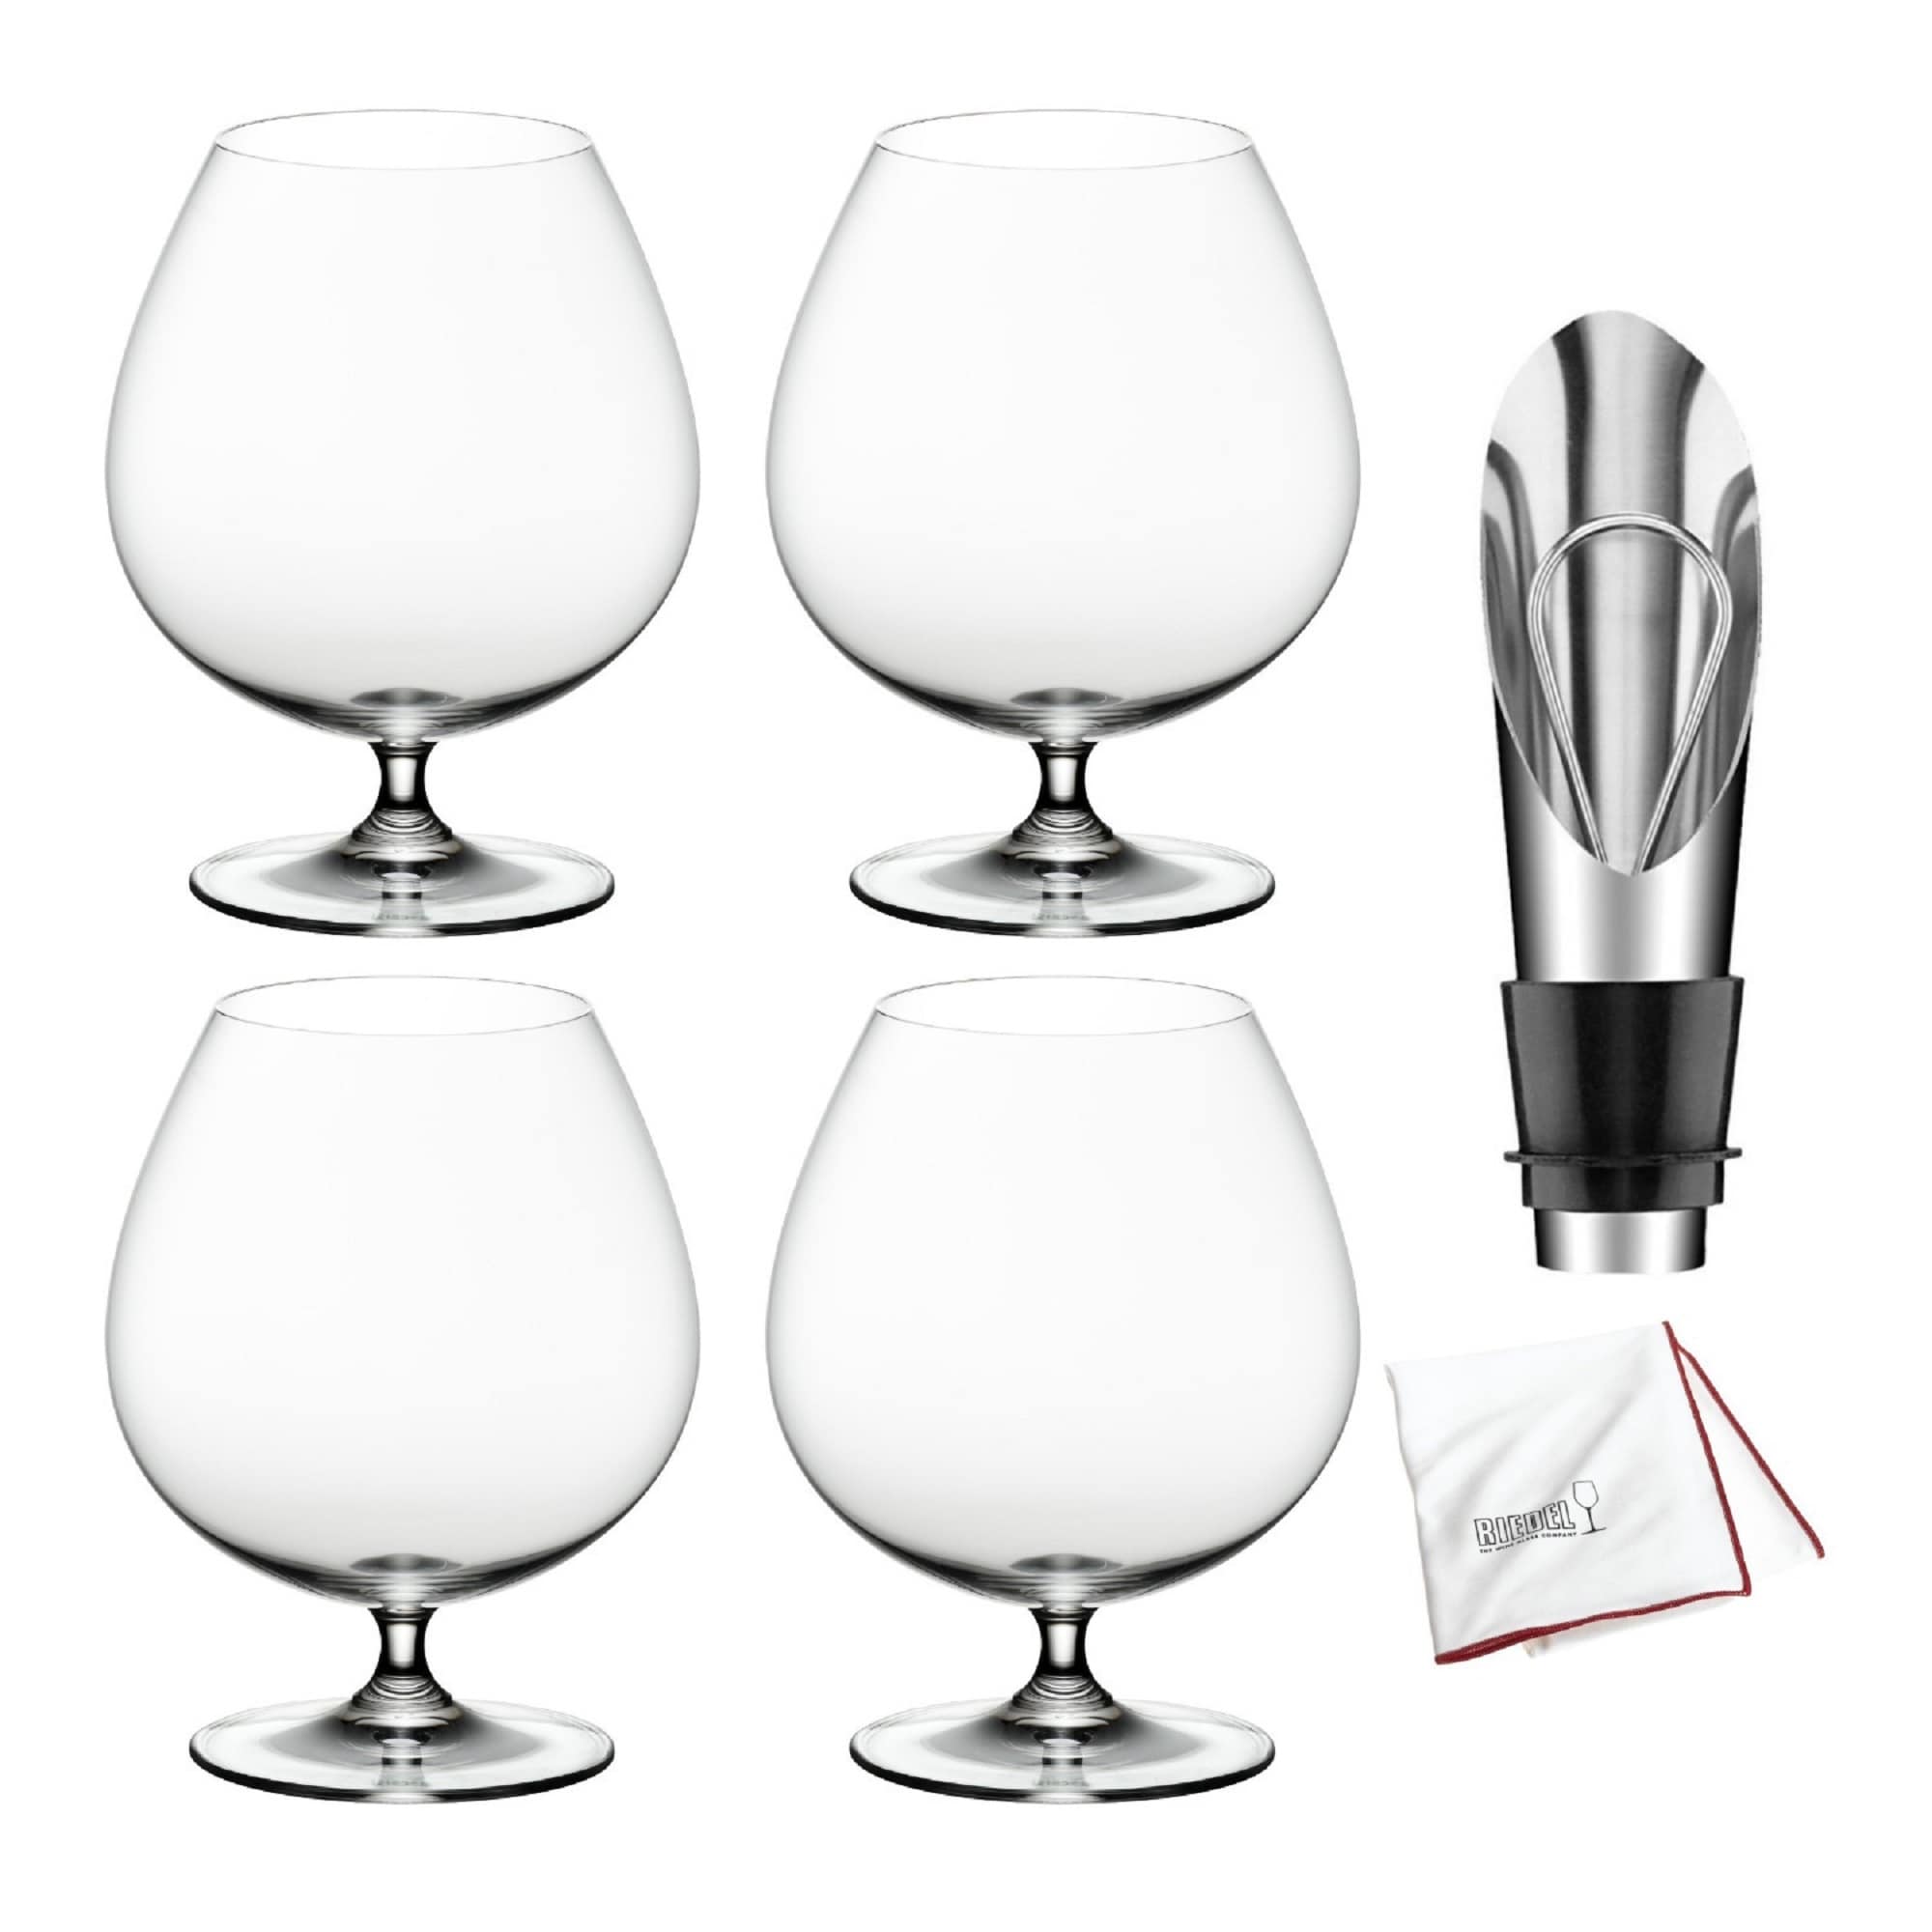 https://ak1.ostkcdn.com/images/products/is/images/direct/6fceed2a11a93c08332c50158aff37c21c7da6e3/Riedel-Vinum-Brandy-Glass-%284-Pack%29-with-Wine-Pourer-%26-Polishing-Cloth.jpg